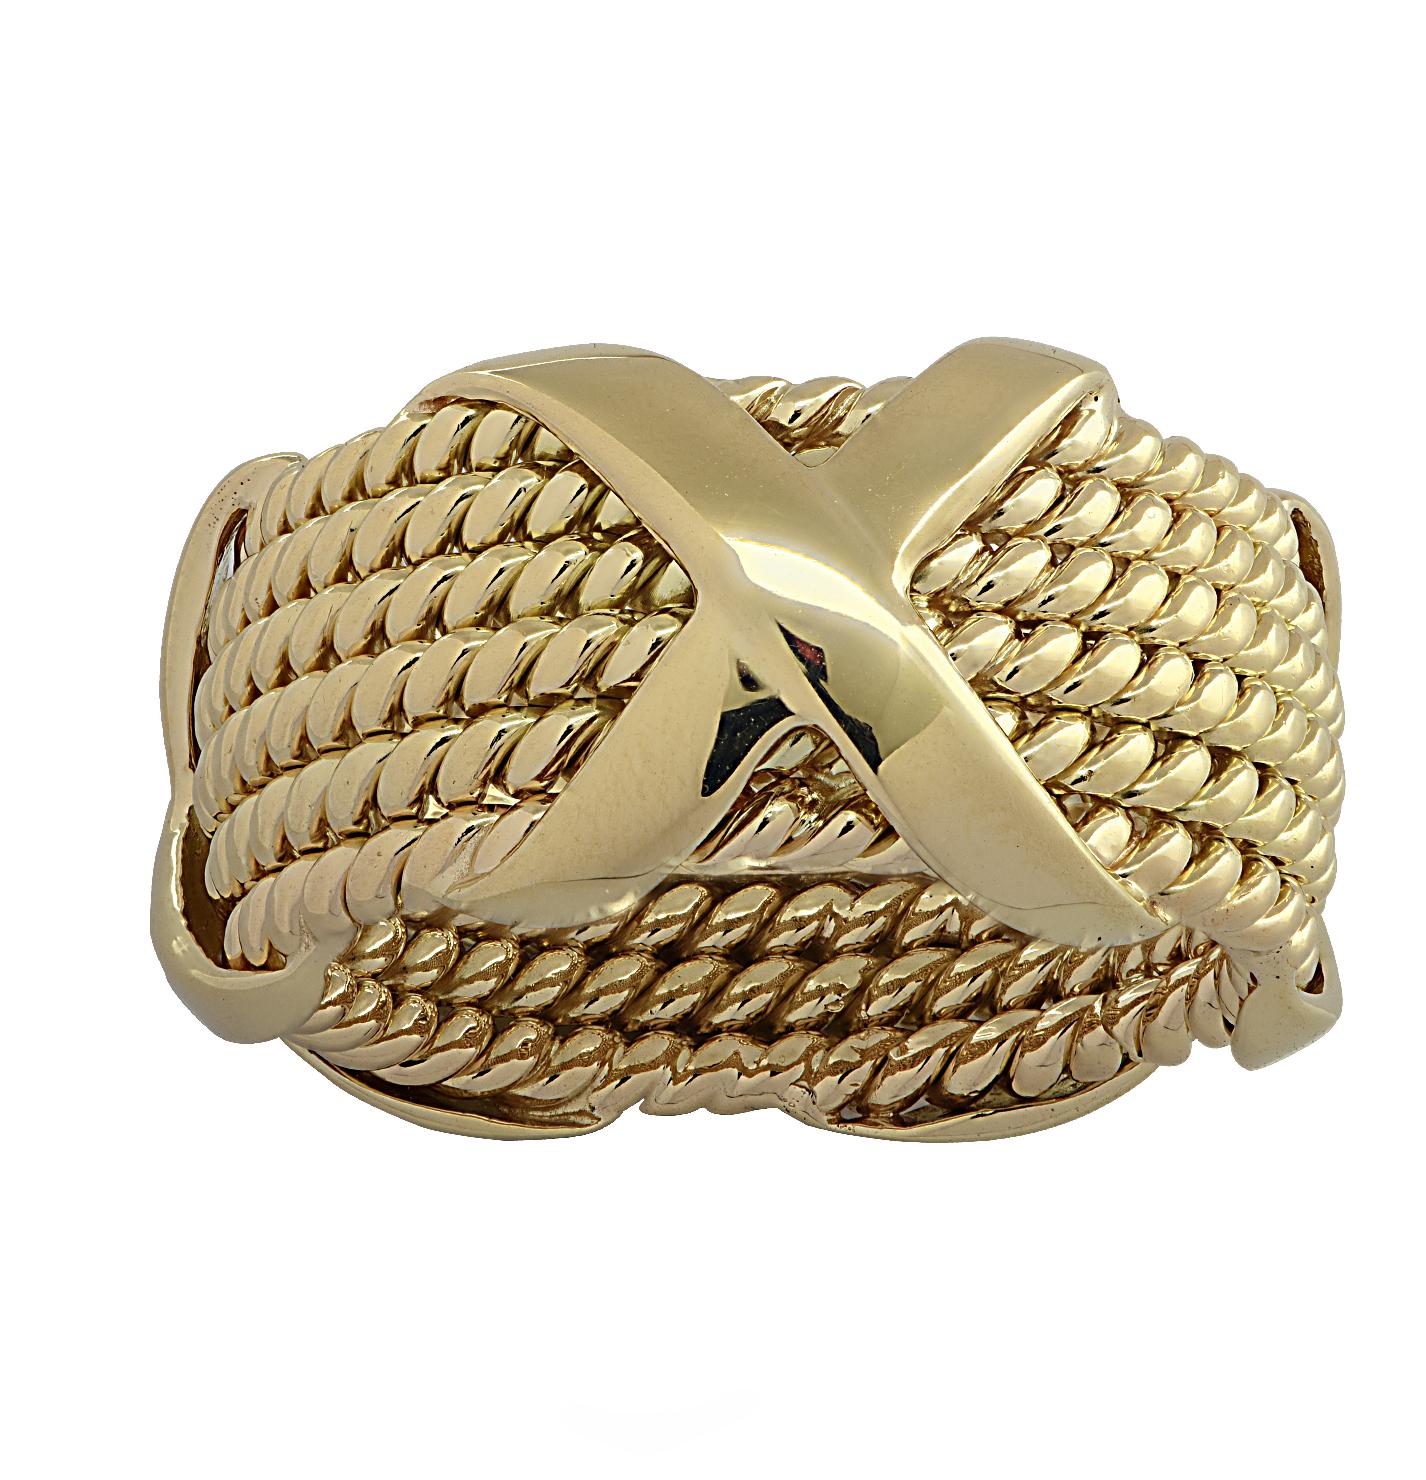 Stunning Tiffany & Co. Schlumberger Rope Six-row X Ring expertly crafted in 18k Yellow Gold, featuring six twisted rope bands adorned with three highly polished “X’s”. This iconic ring measures 11.12 mm in width and it is a size 6.5. Since 1956 Jean